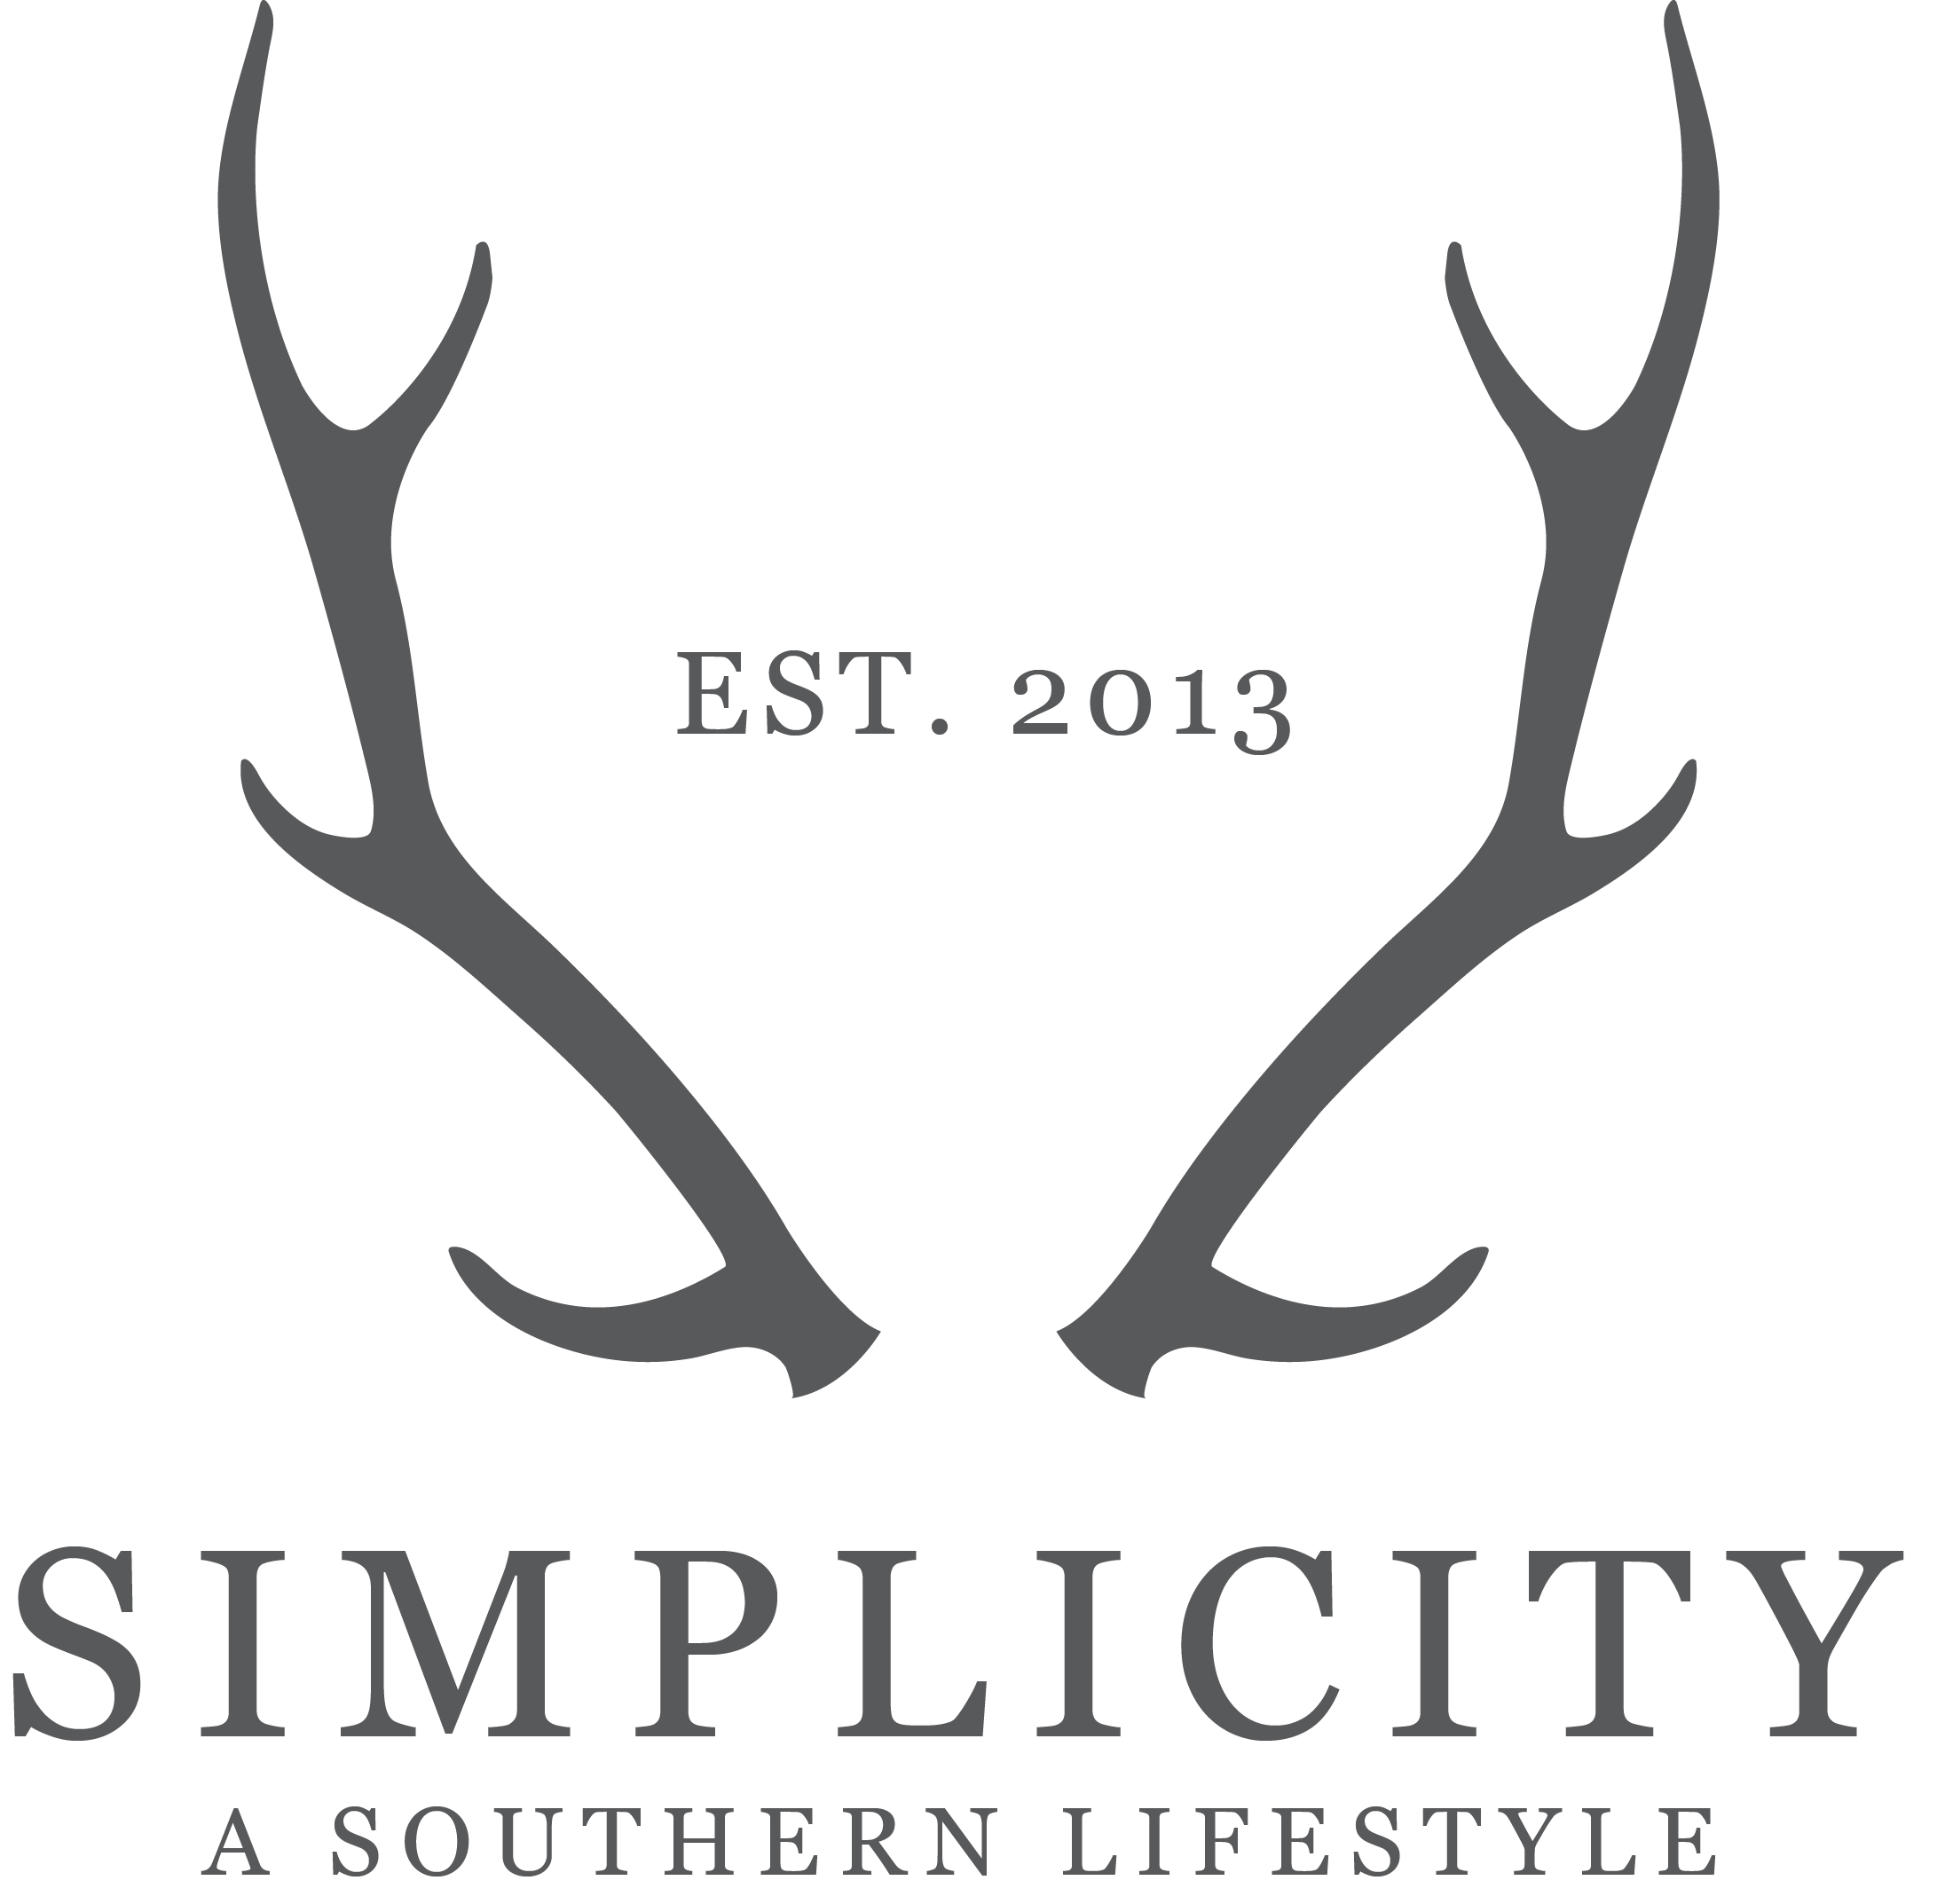 Simplicity a Southern Lifestyle